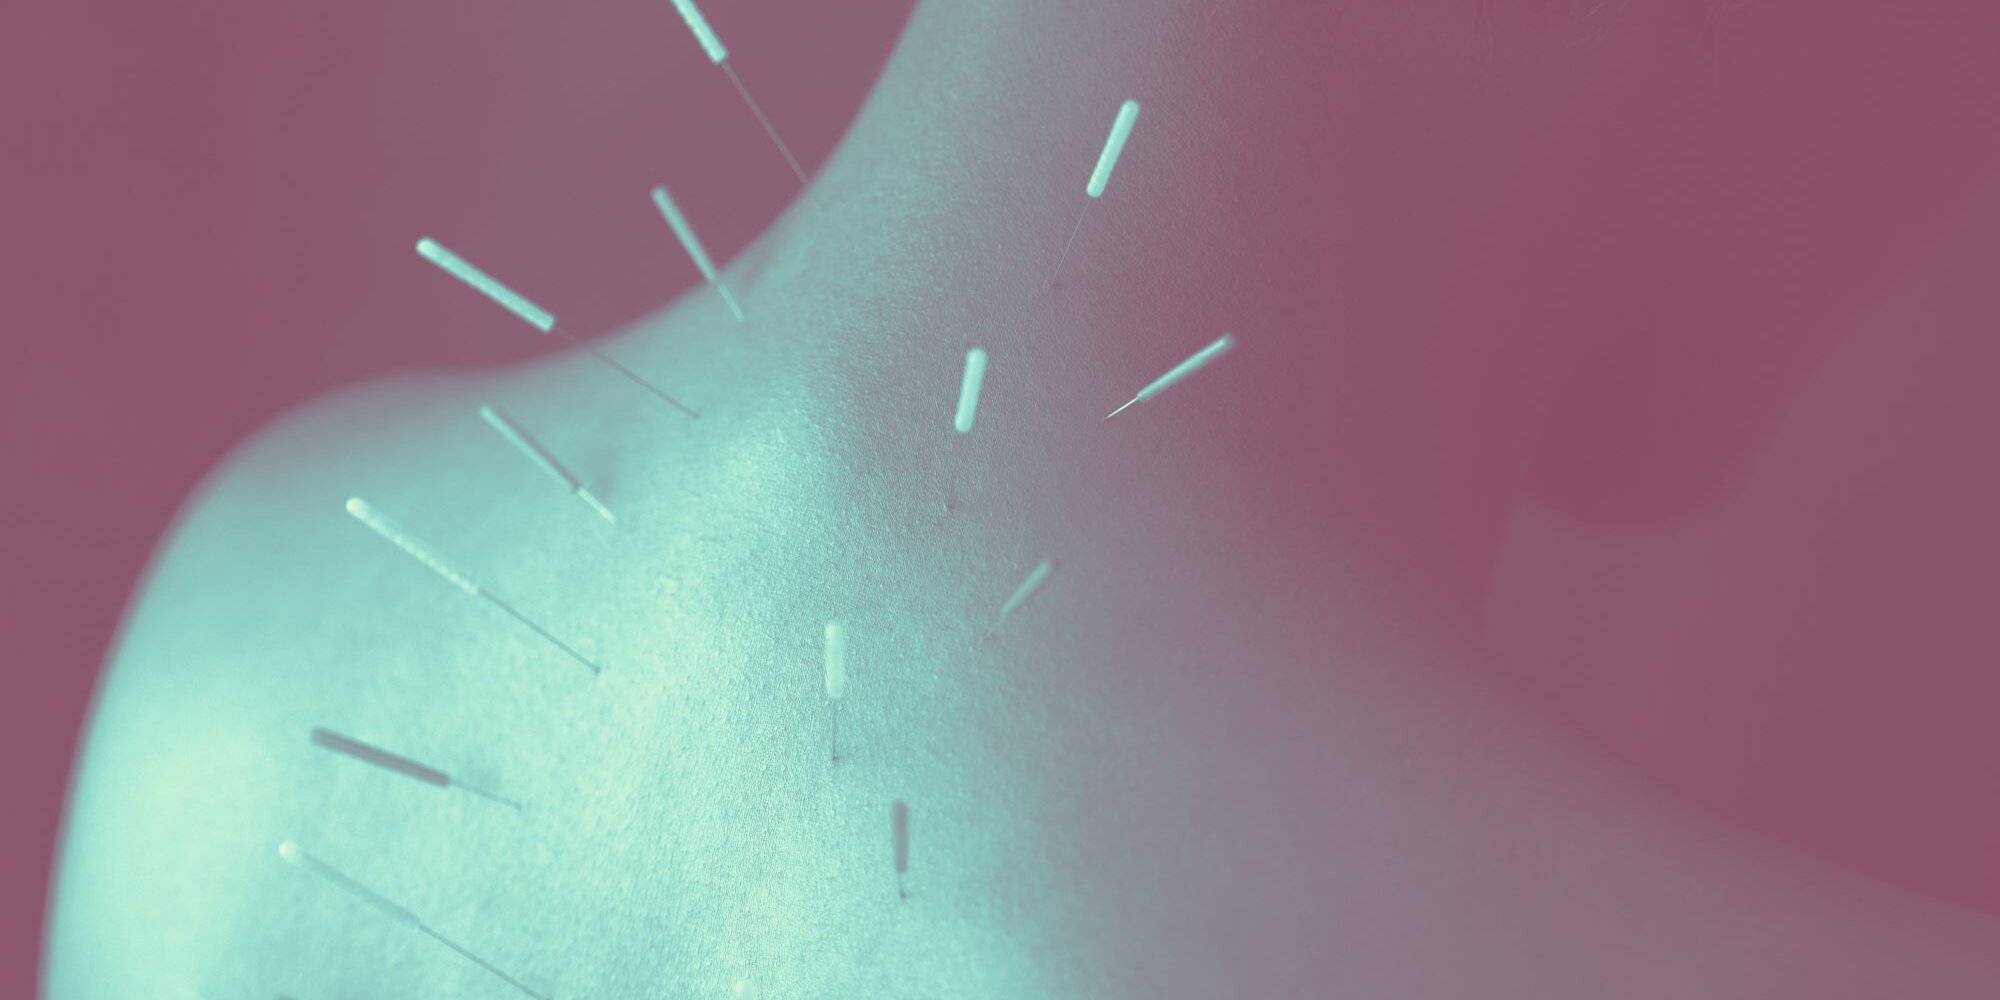 The Acupuncture Benefits You Should Know About Before Your First Session